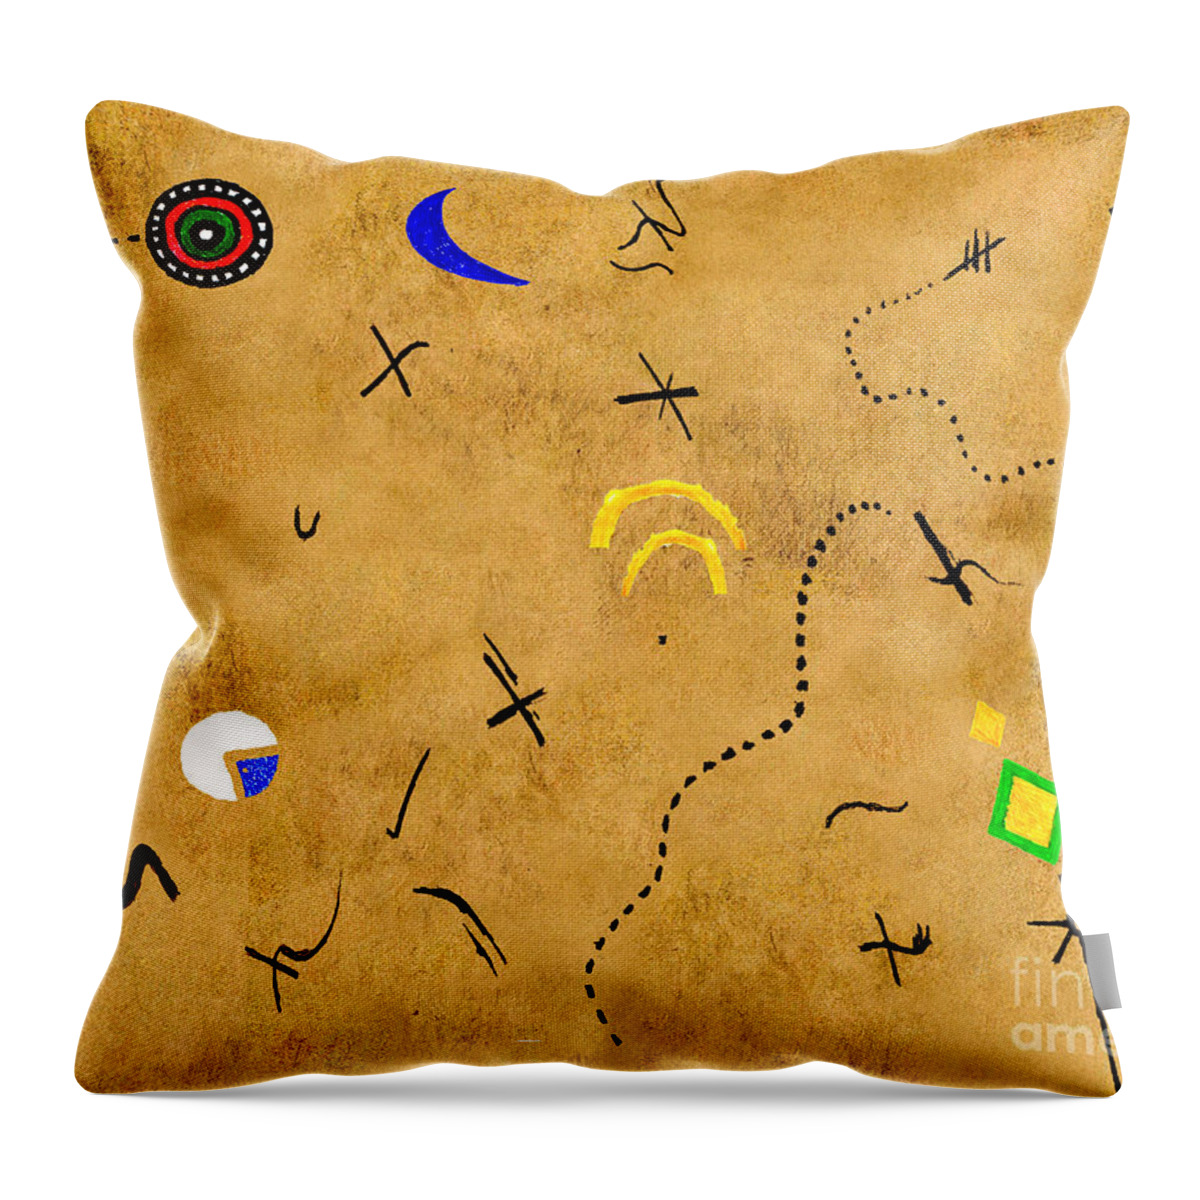 Miro Throw Pillow featuring the digital art Miroesque 2 by Andy Mercer